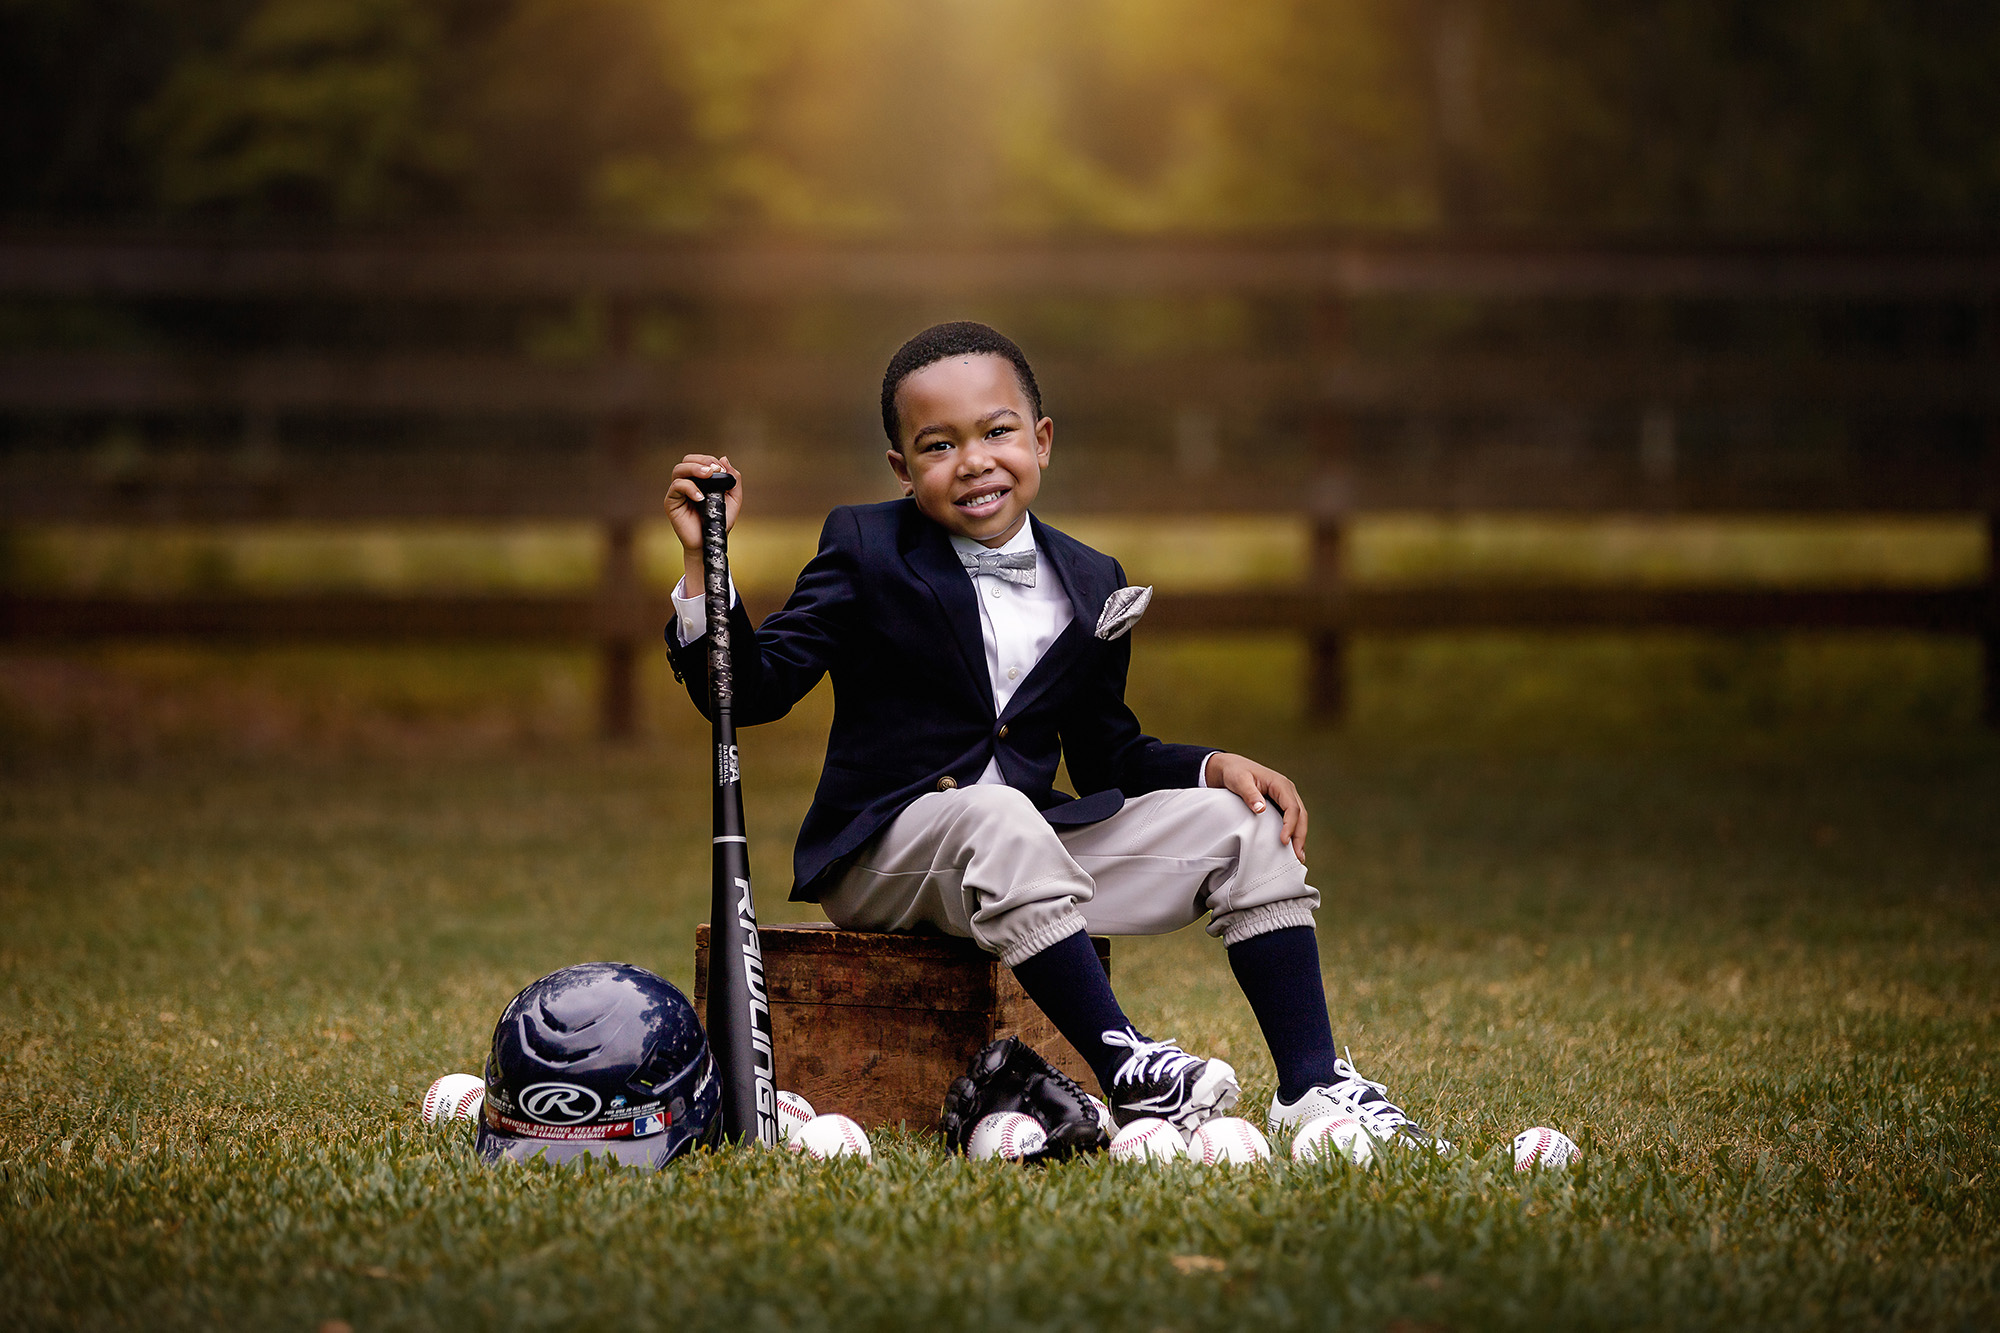 Adorable and stylish little boy with his baseball gear ready to go to one of the indoor playgrounds in Houston, Texas.